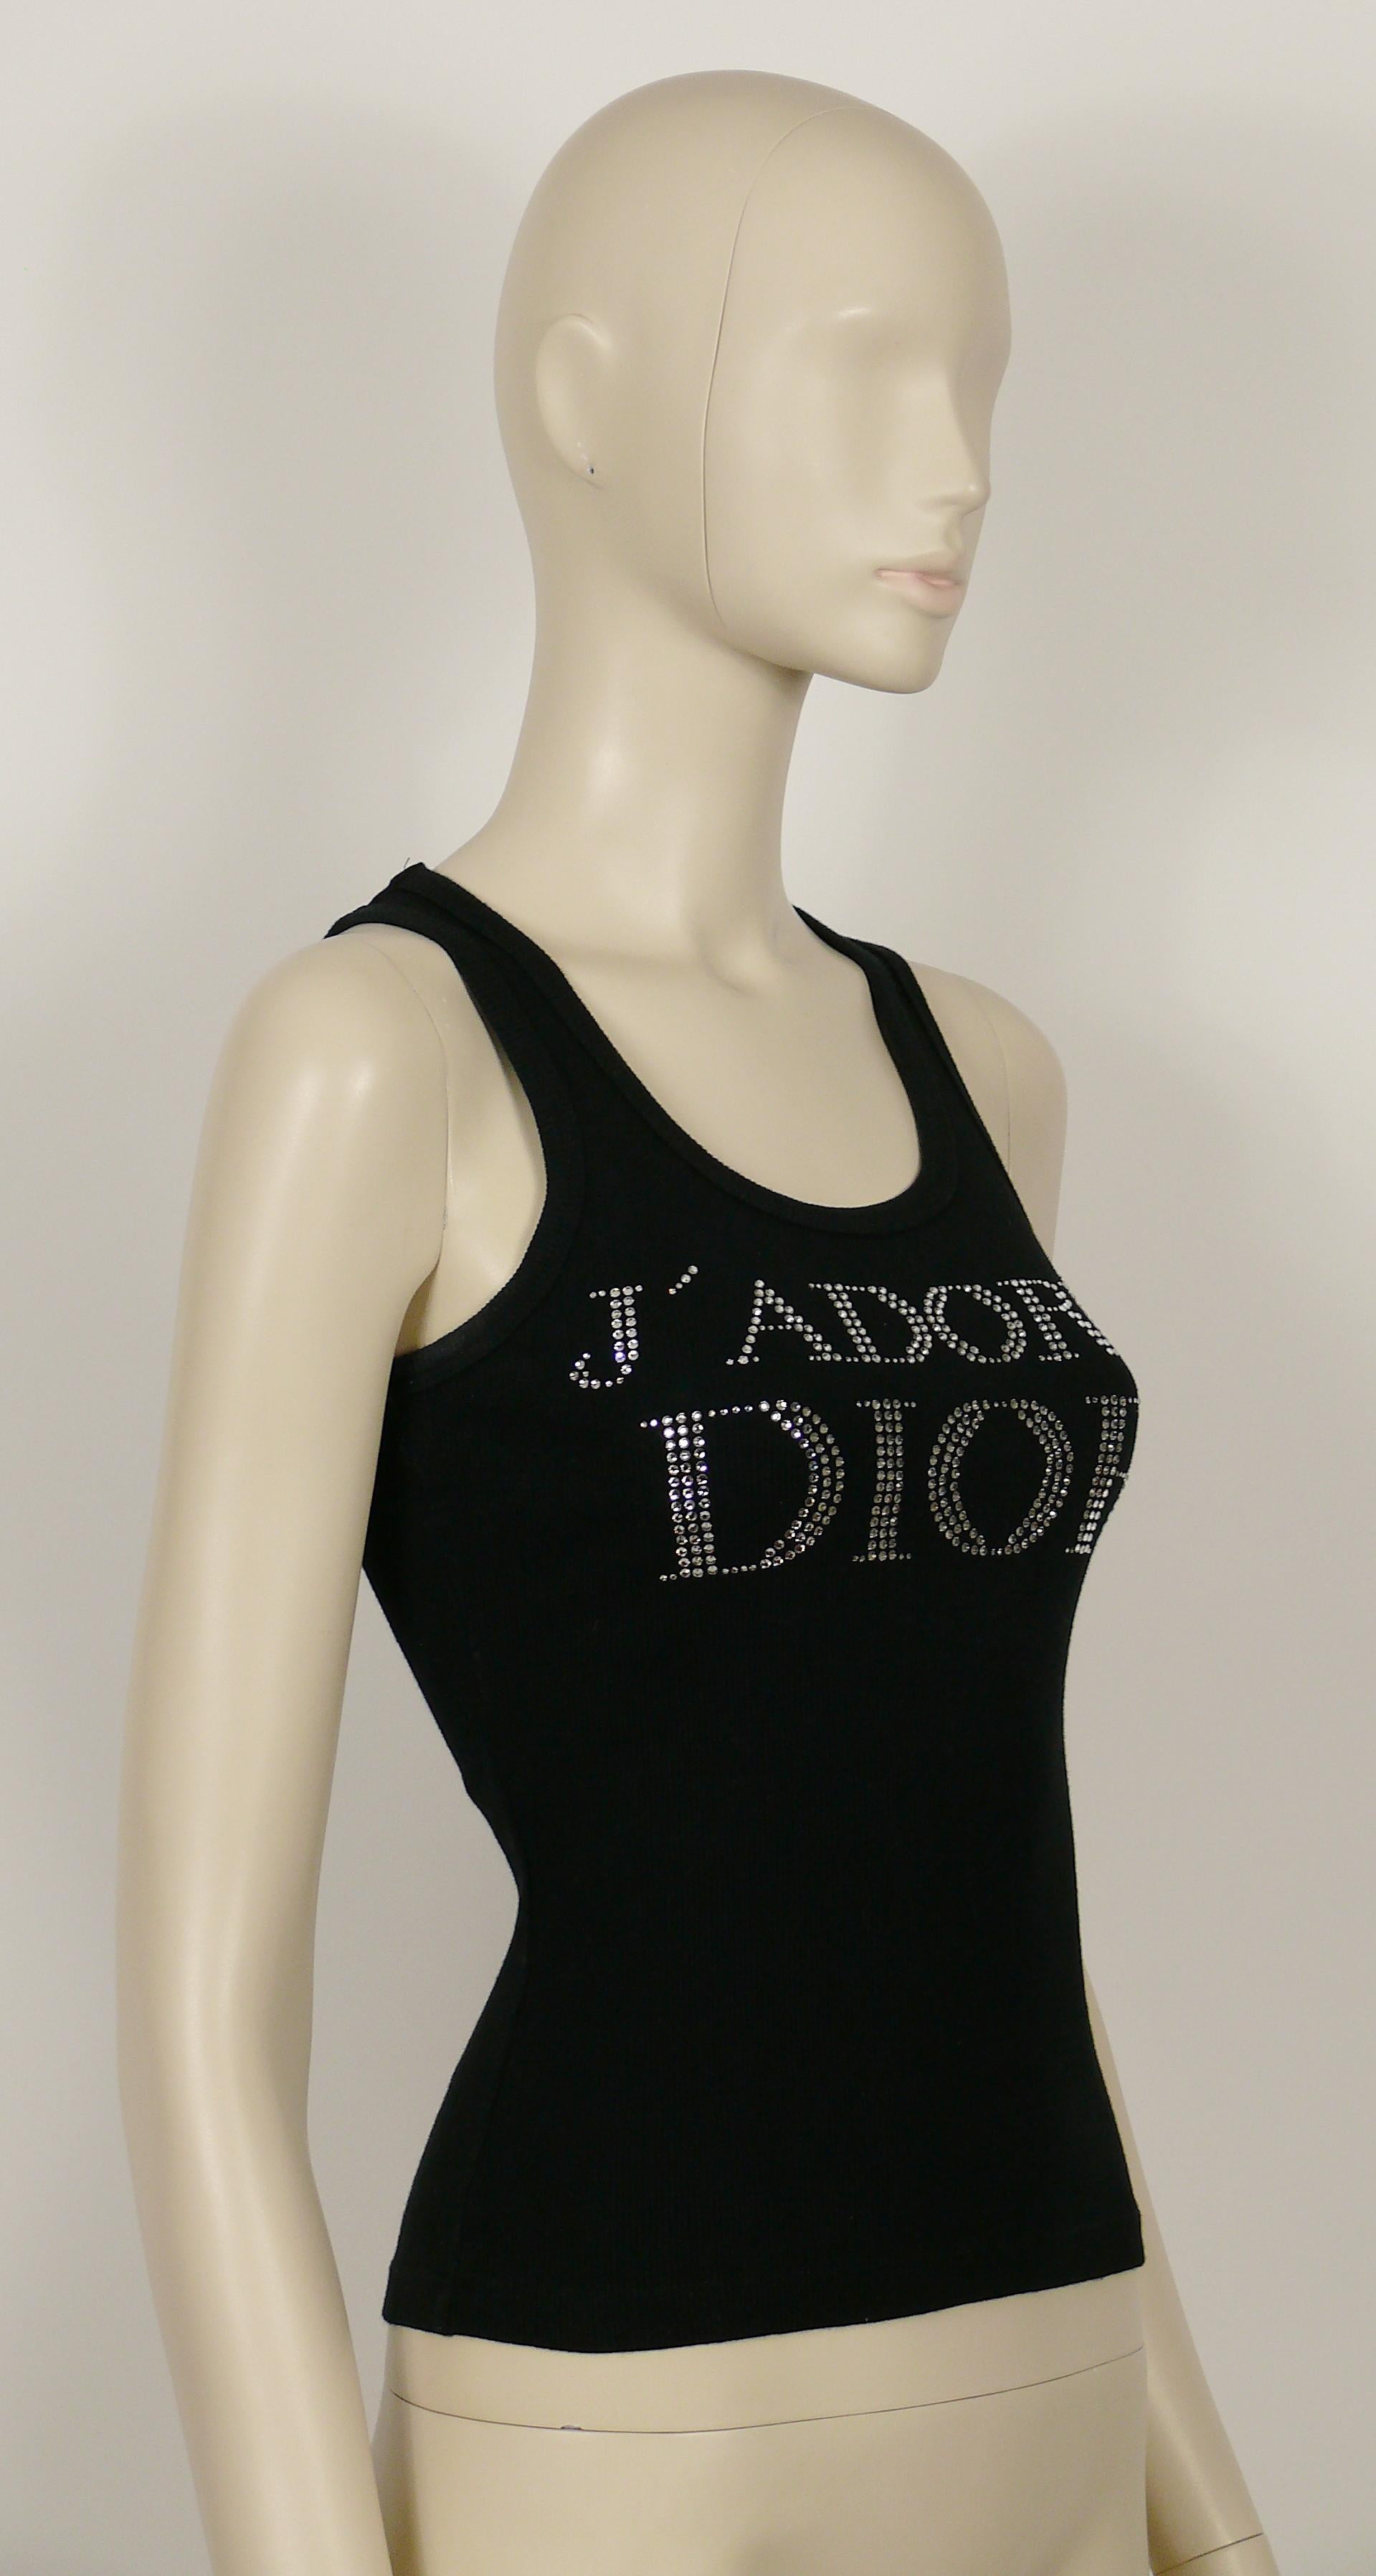 CHRISTIAN DIOR by JOHN GALLIANO vintage black tank top embellished with clear crystals J'ADORE DIOR at front and 1947 at back.

Label reads CHRISTIAN DIOR BOUTIQUE Paris.
Made in France.

Size tag reads : F 36 / GB 8 / D 34 / USA 4.
Please refer to